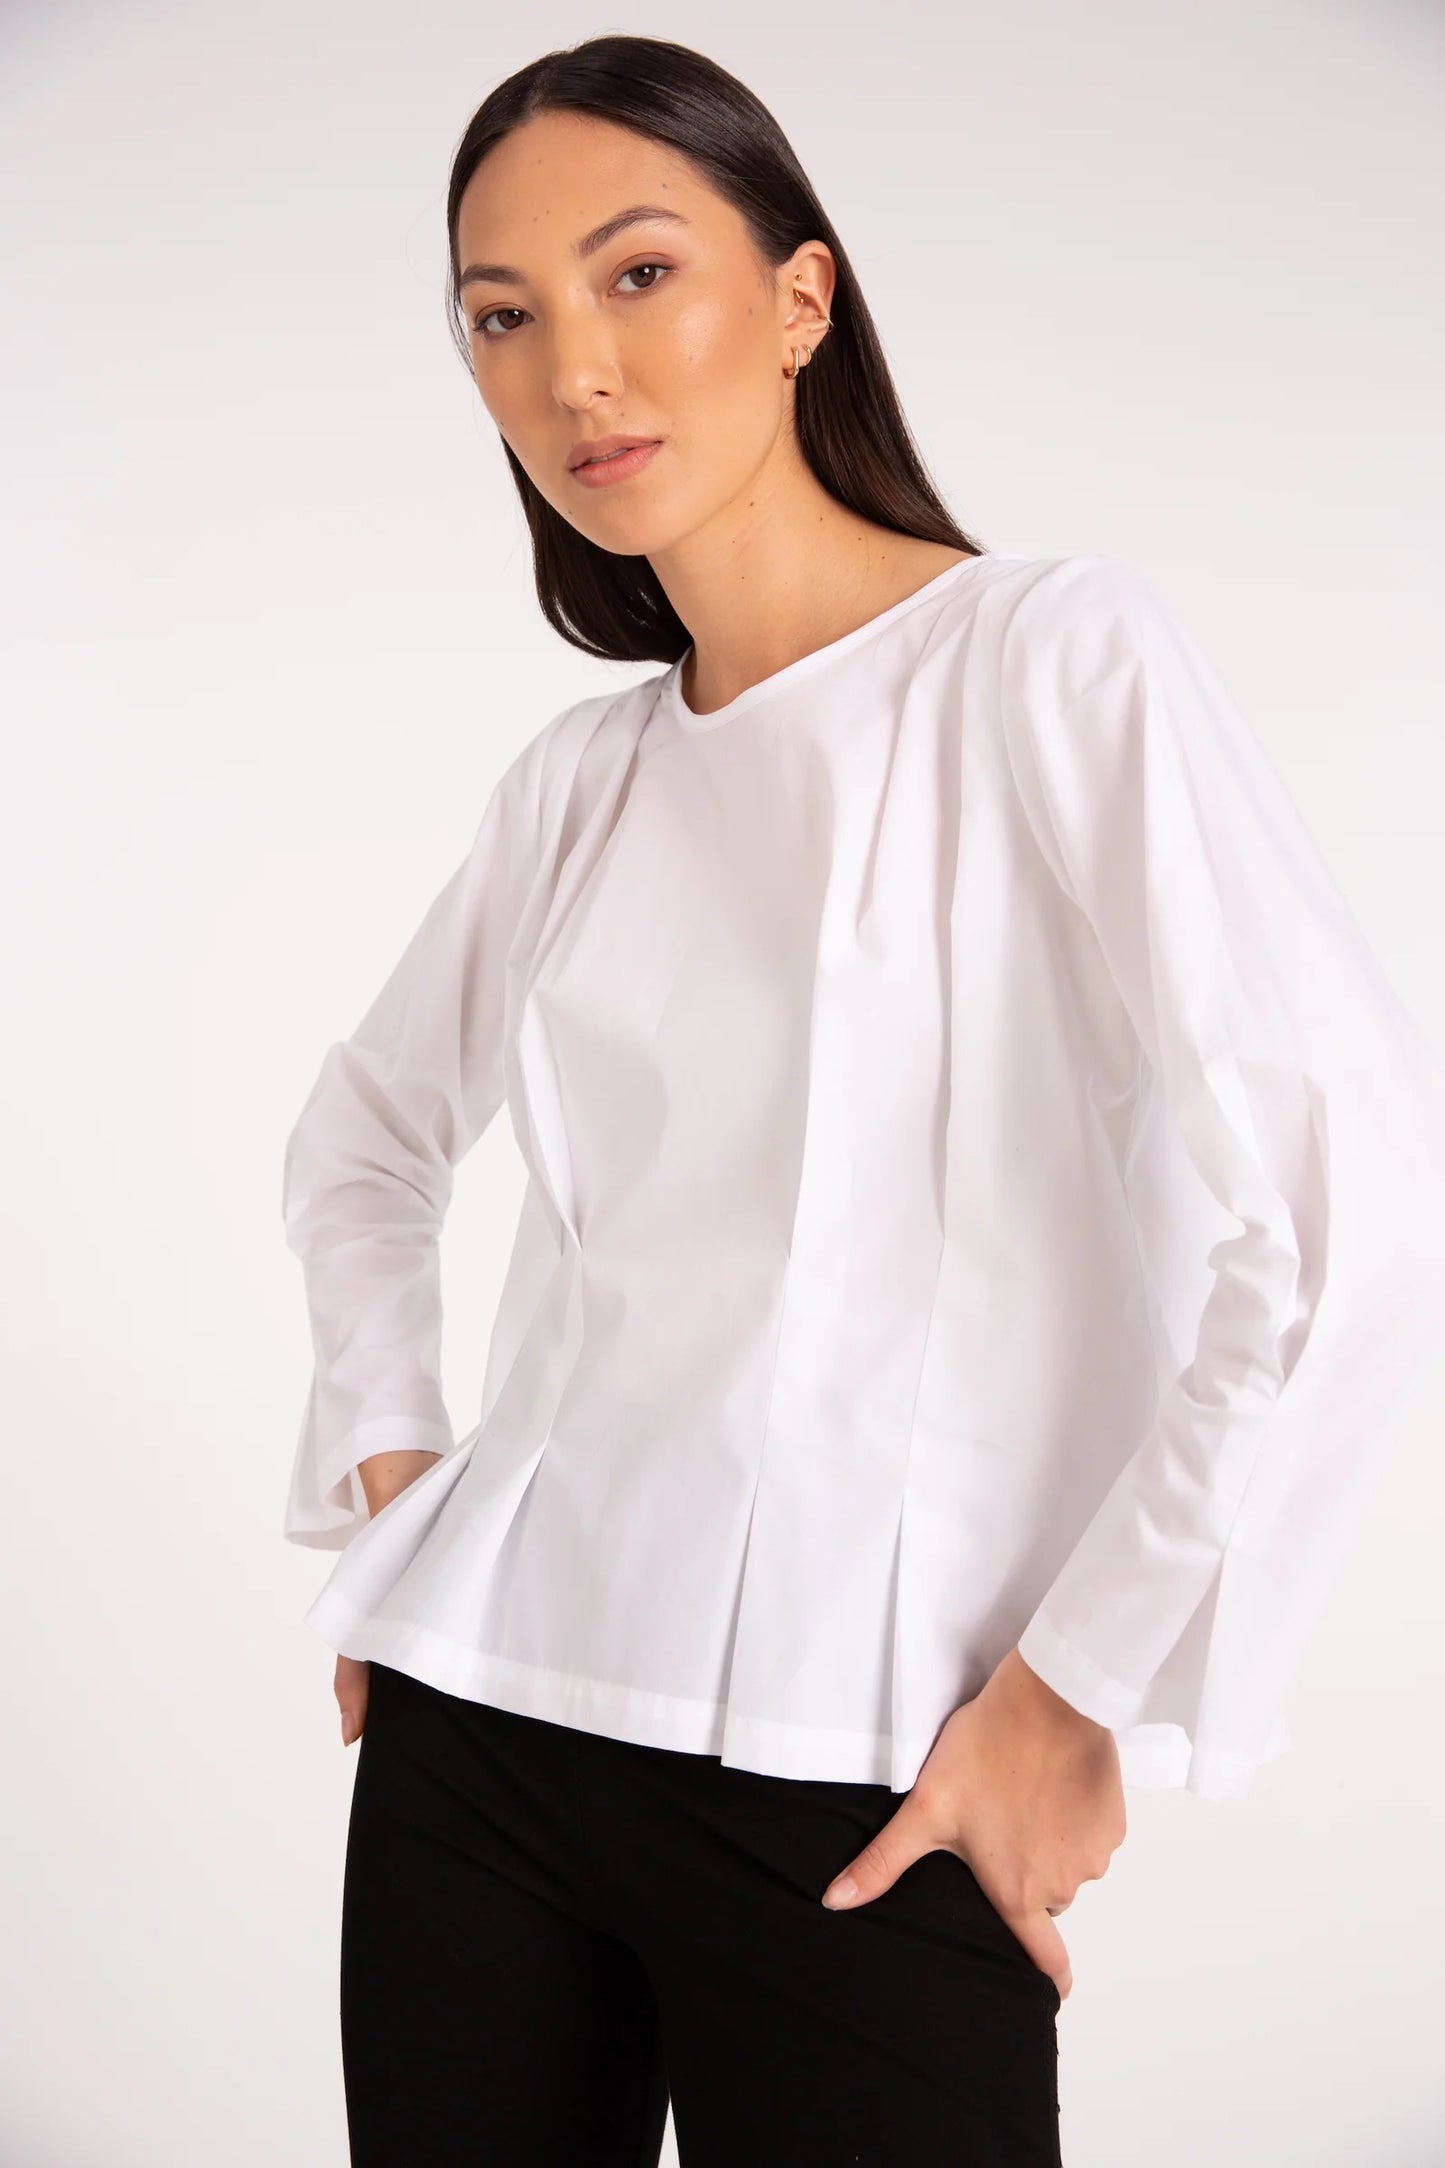 Outline Clothing loves the attention to detail in the Muse Top from Nyne. The Muse Top is a timeless style for every occasion and season. Here in classic black cotton, it features knife pleat details on the shoulders and waist. 